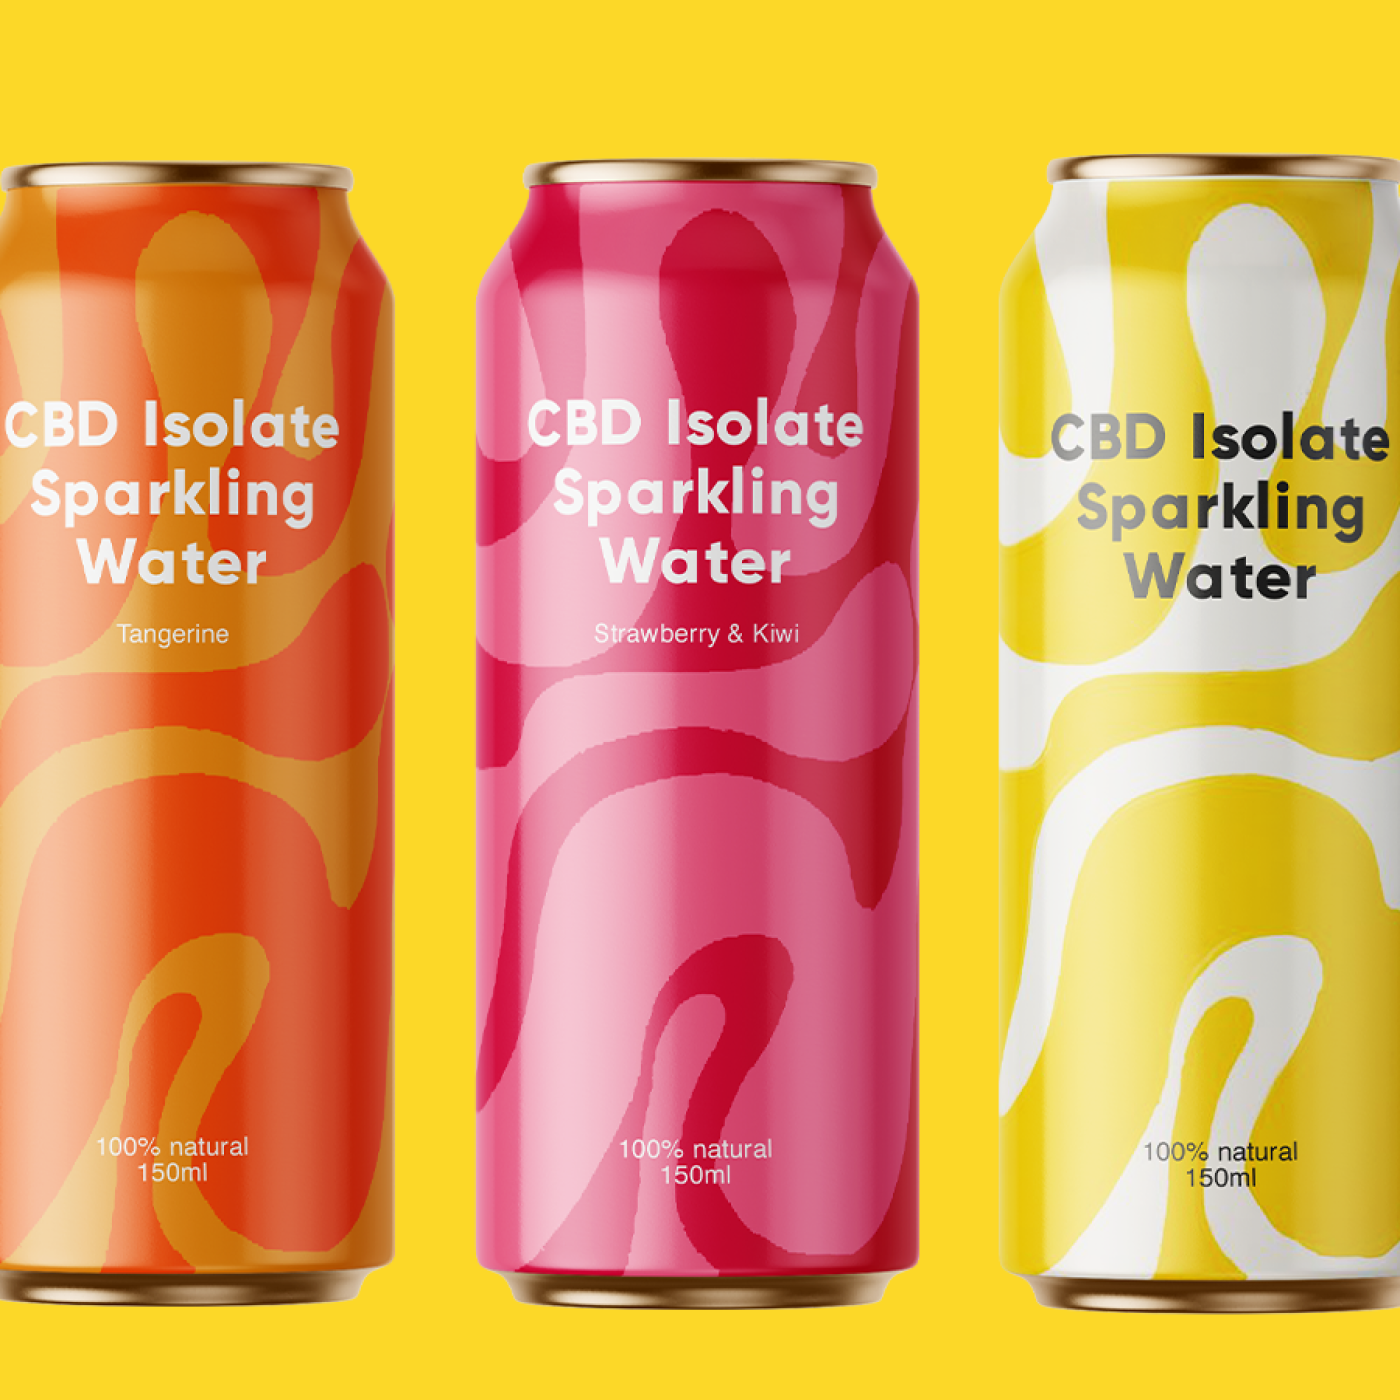 Tenacious Labs Manufacturing White Label Canned Functional Beverages